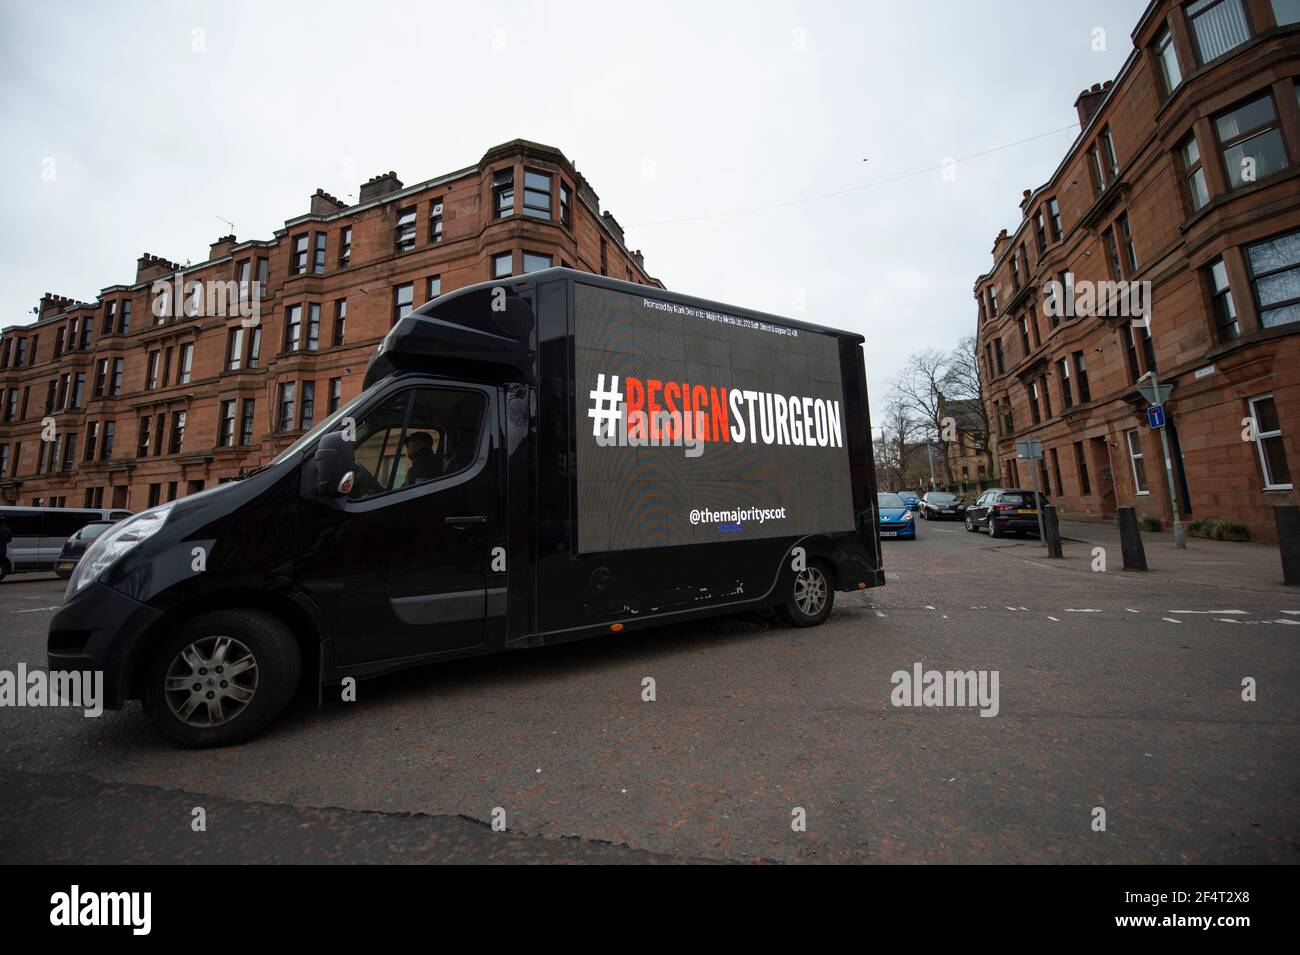 Glasgow, Scotland, UK. 23 March 2021. PICTURED: Billboard message to Nicola Sturgeon, ‘WE DON'T BELIVE YOU NICOLA' in Govanhill area of Glasgow where the First Minster is standing for Parliament. Credit: Colin Fisher/Alamy Live News. Stock Photo